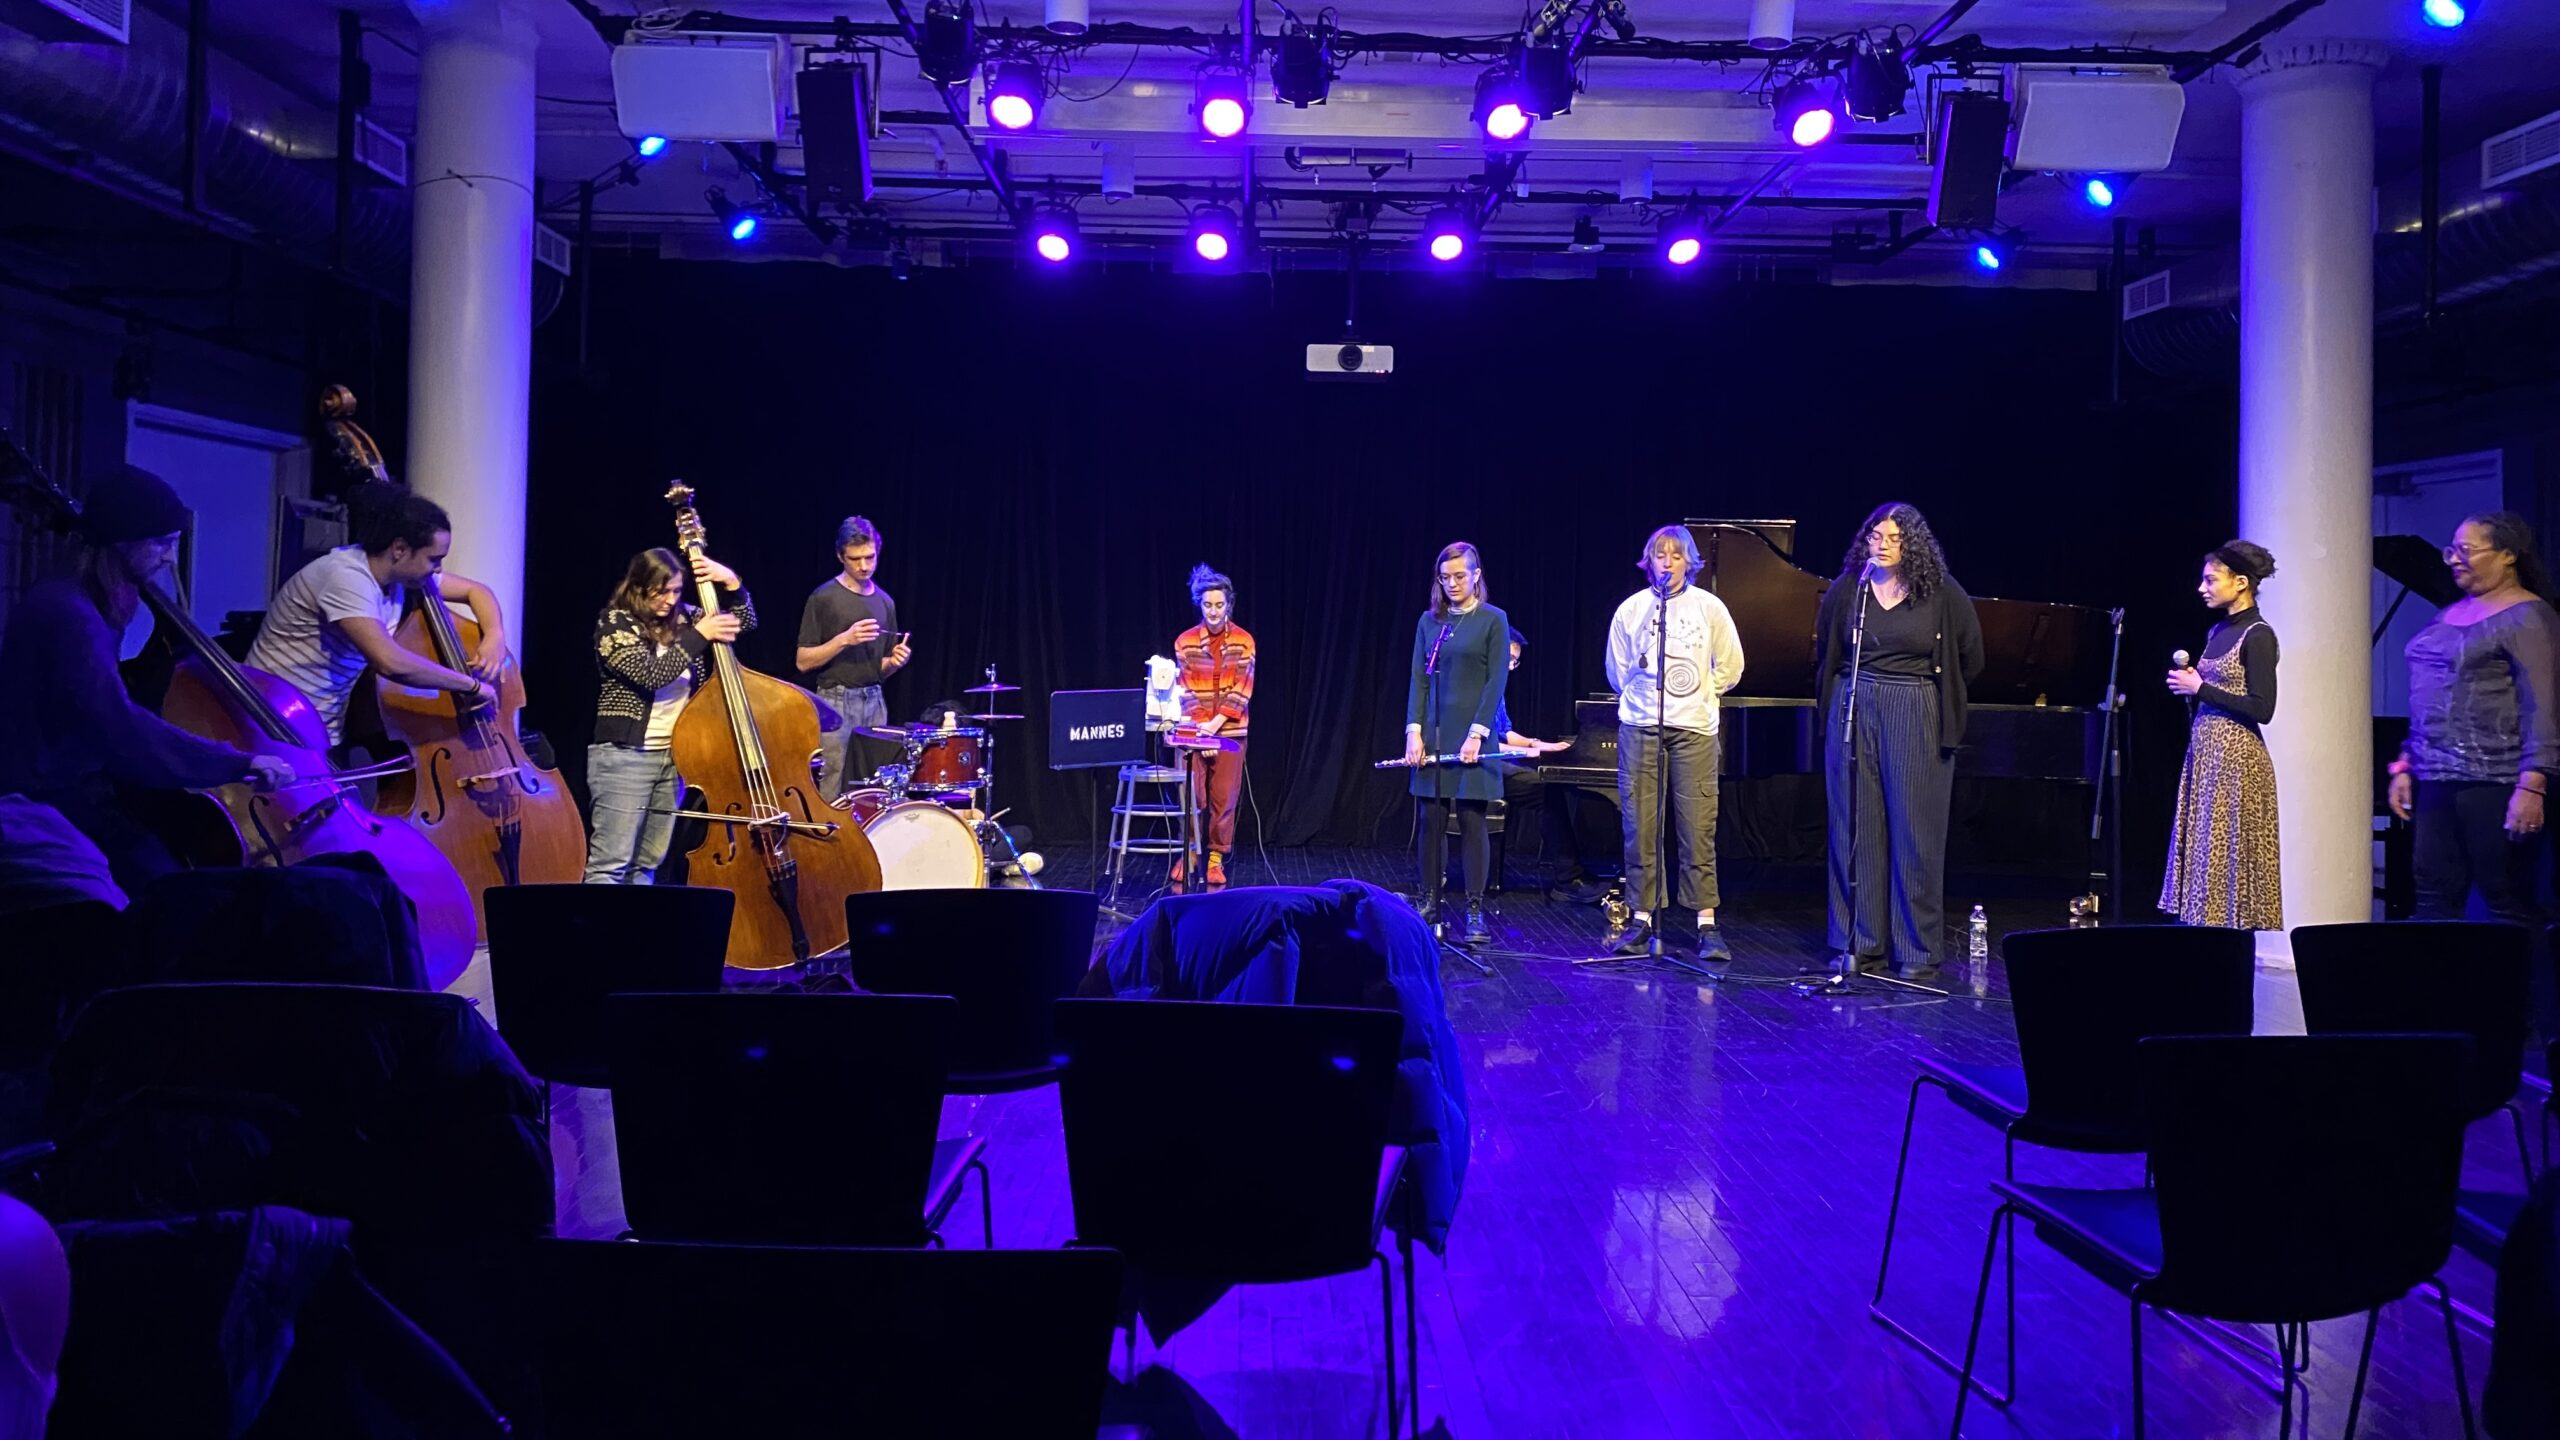 11 students and alumni stand on stage and perform with microphones, basses, and a drum set with rows of chairs in front of them.